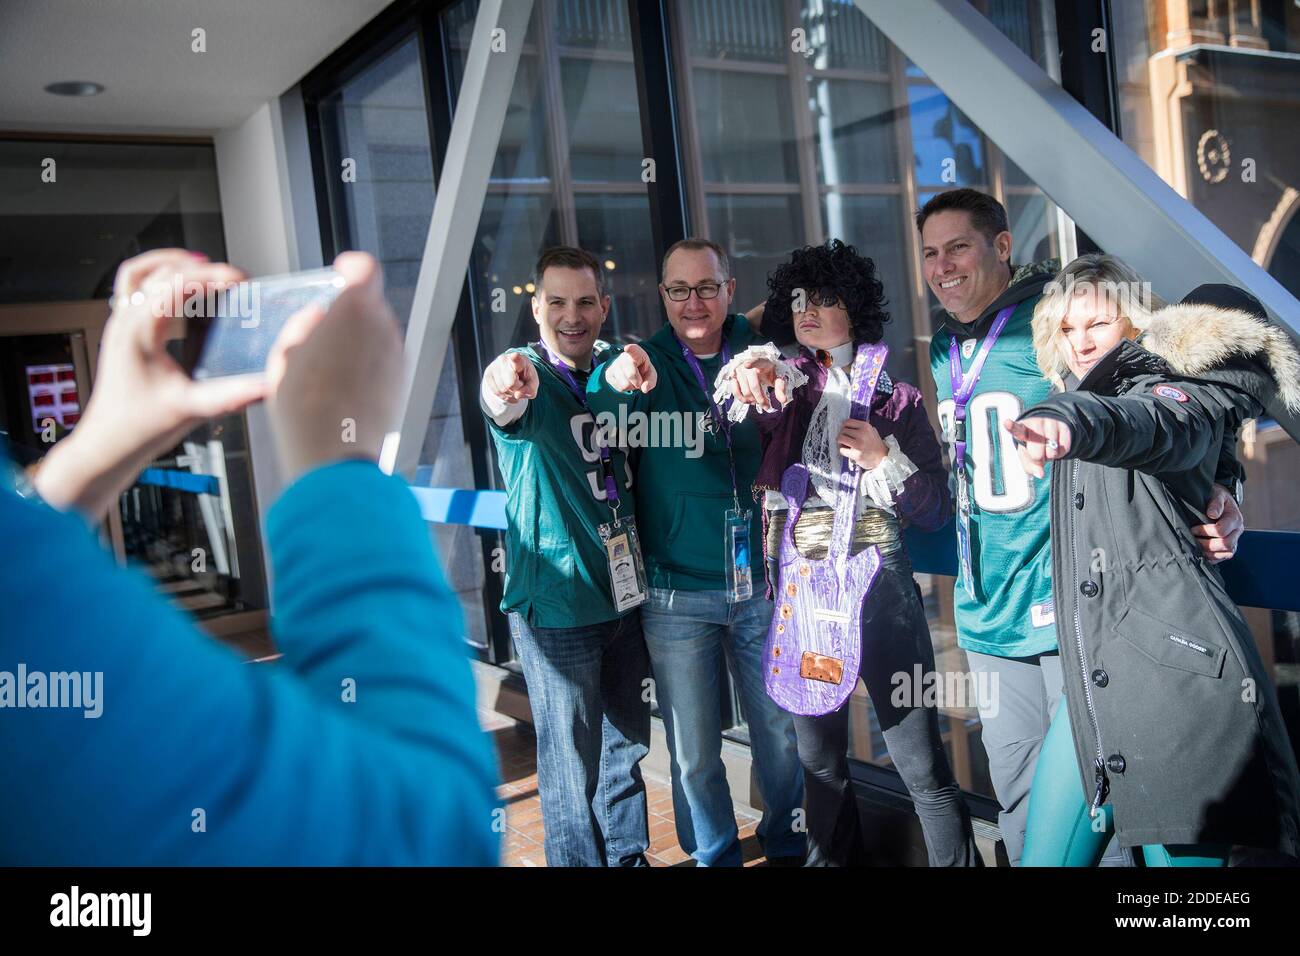 NO FILM, NO VIDEO, NO TV, NO DOCUMENTARY - Eagles fans from Philadelphia Matt Ryan, from left, John Ford, Jim Godorecci and Kari Godorecci pose for a photo with Prince impersonator Andrew Anderson, center, in the skyway over Nicollet Mall Sunday, Feb. 4, 2018 in Minneapolis, Minn. Photo by Lelia Navidi/Minneapolis Star Tribune/TNS/ABACAPRESS.COM Stock Photo